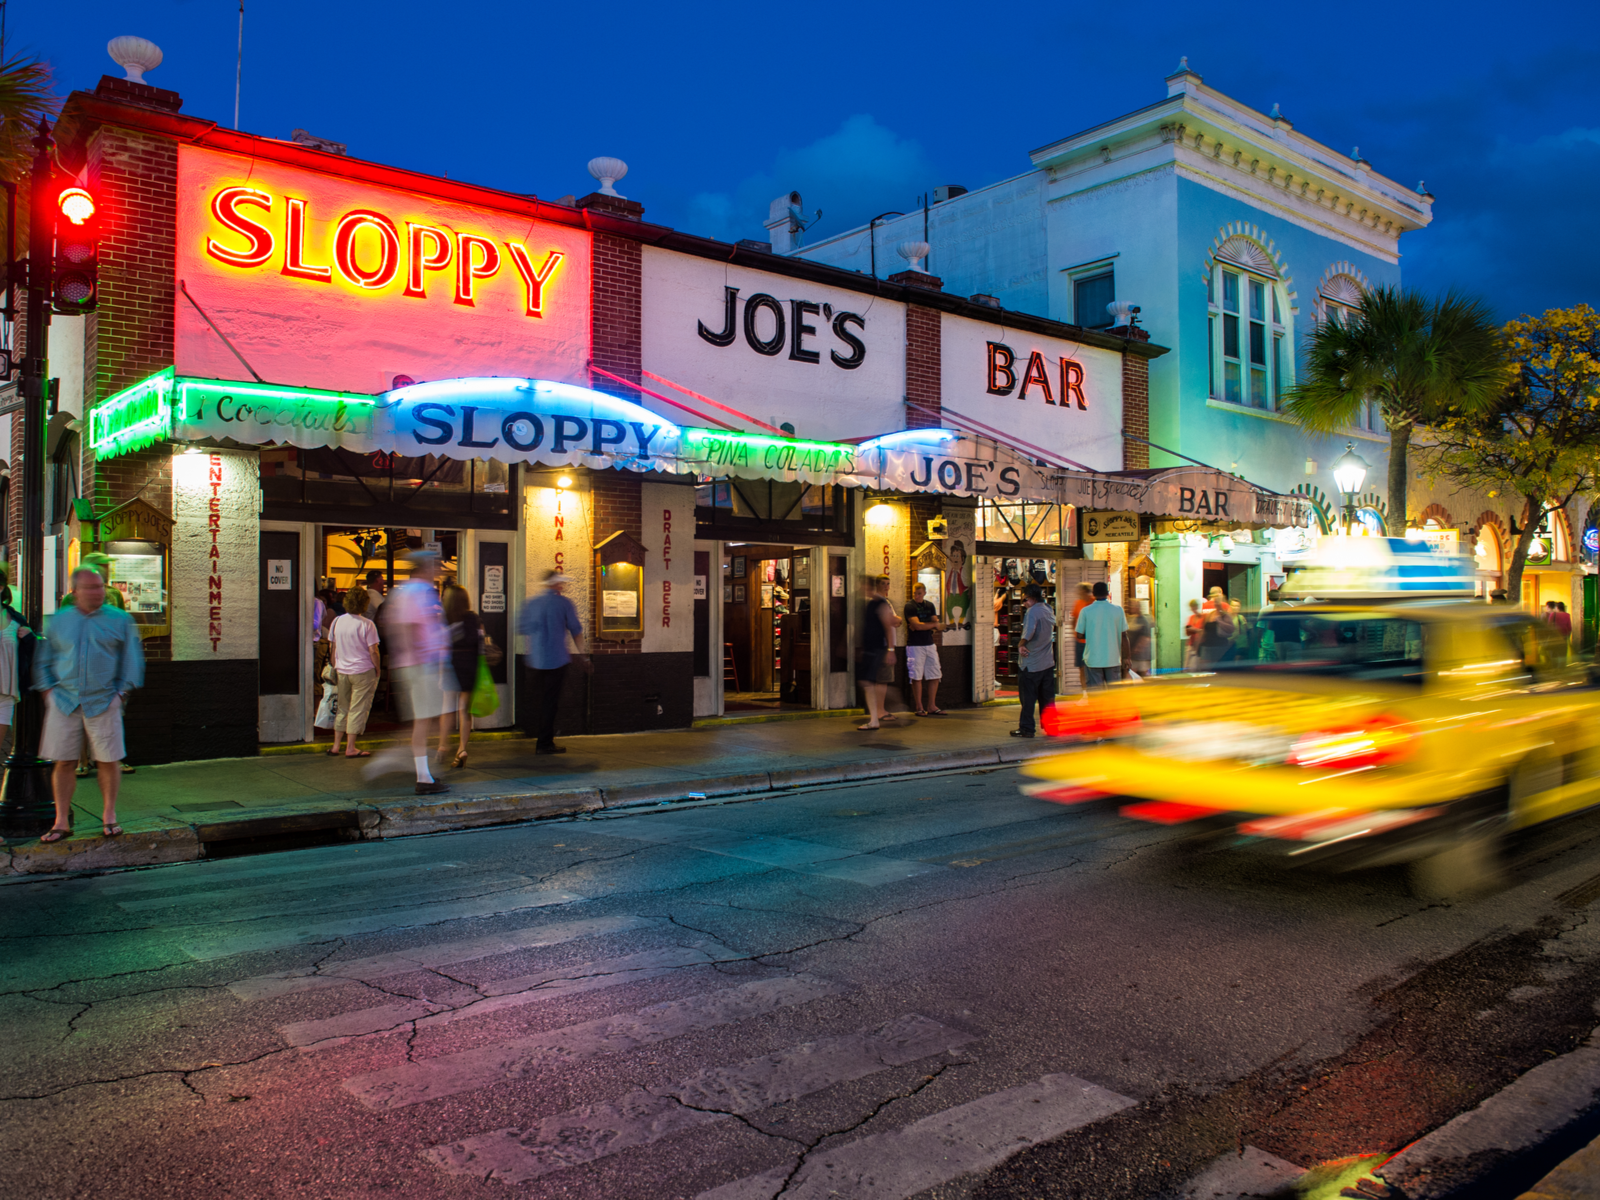 Sloppy Joe's bar pictured on Duval Street during the cheapest time to visit Key West